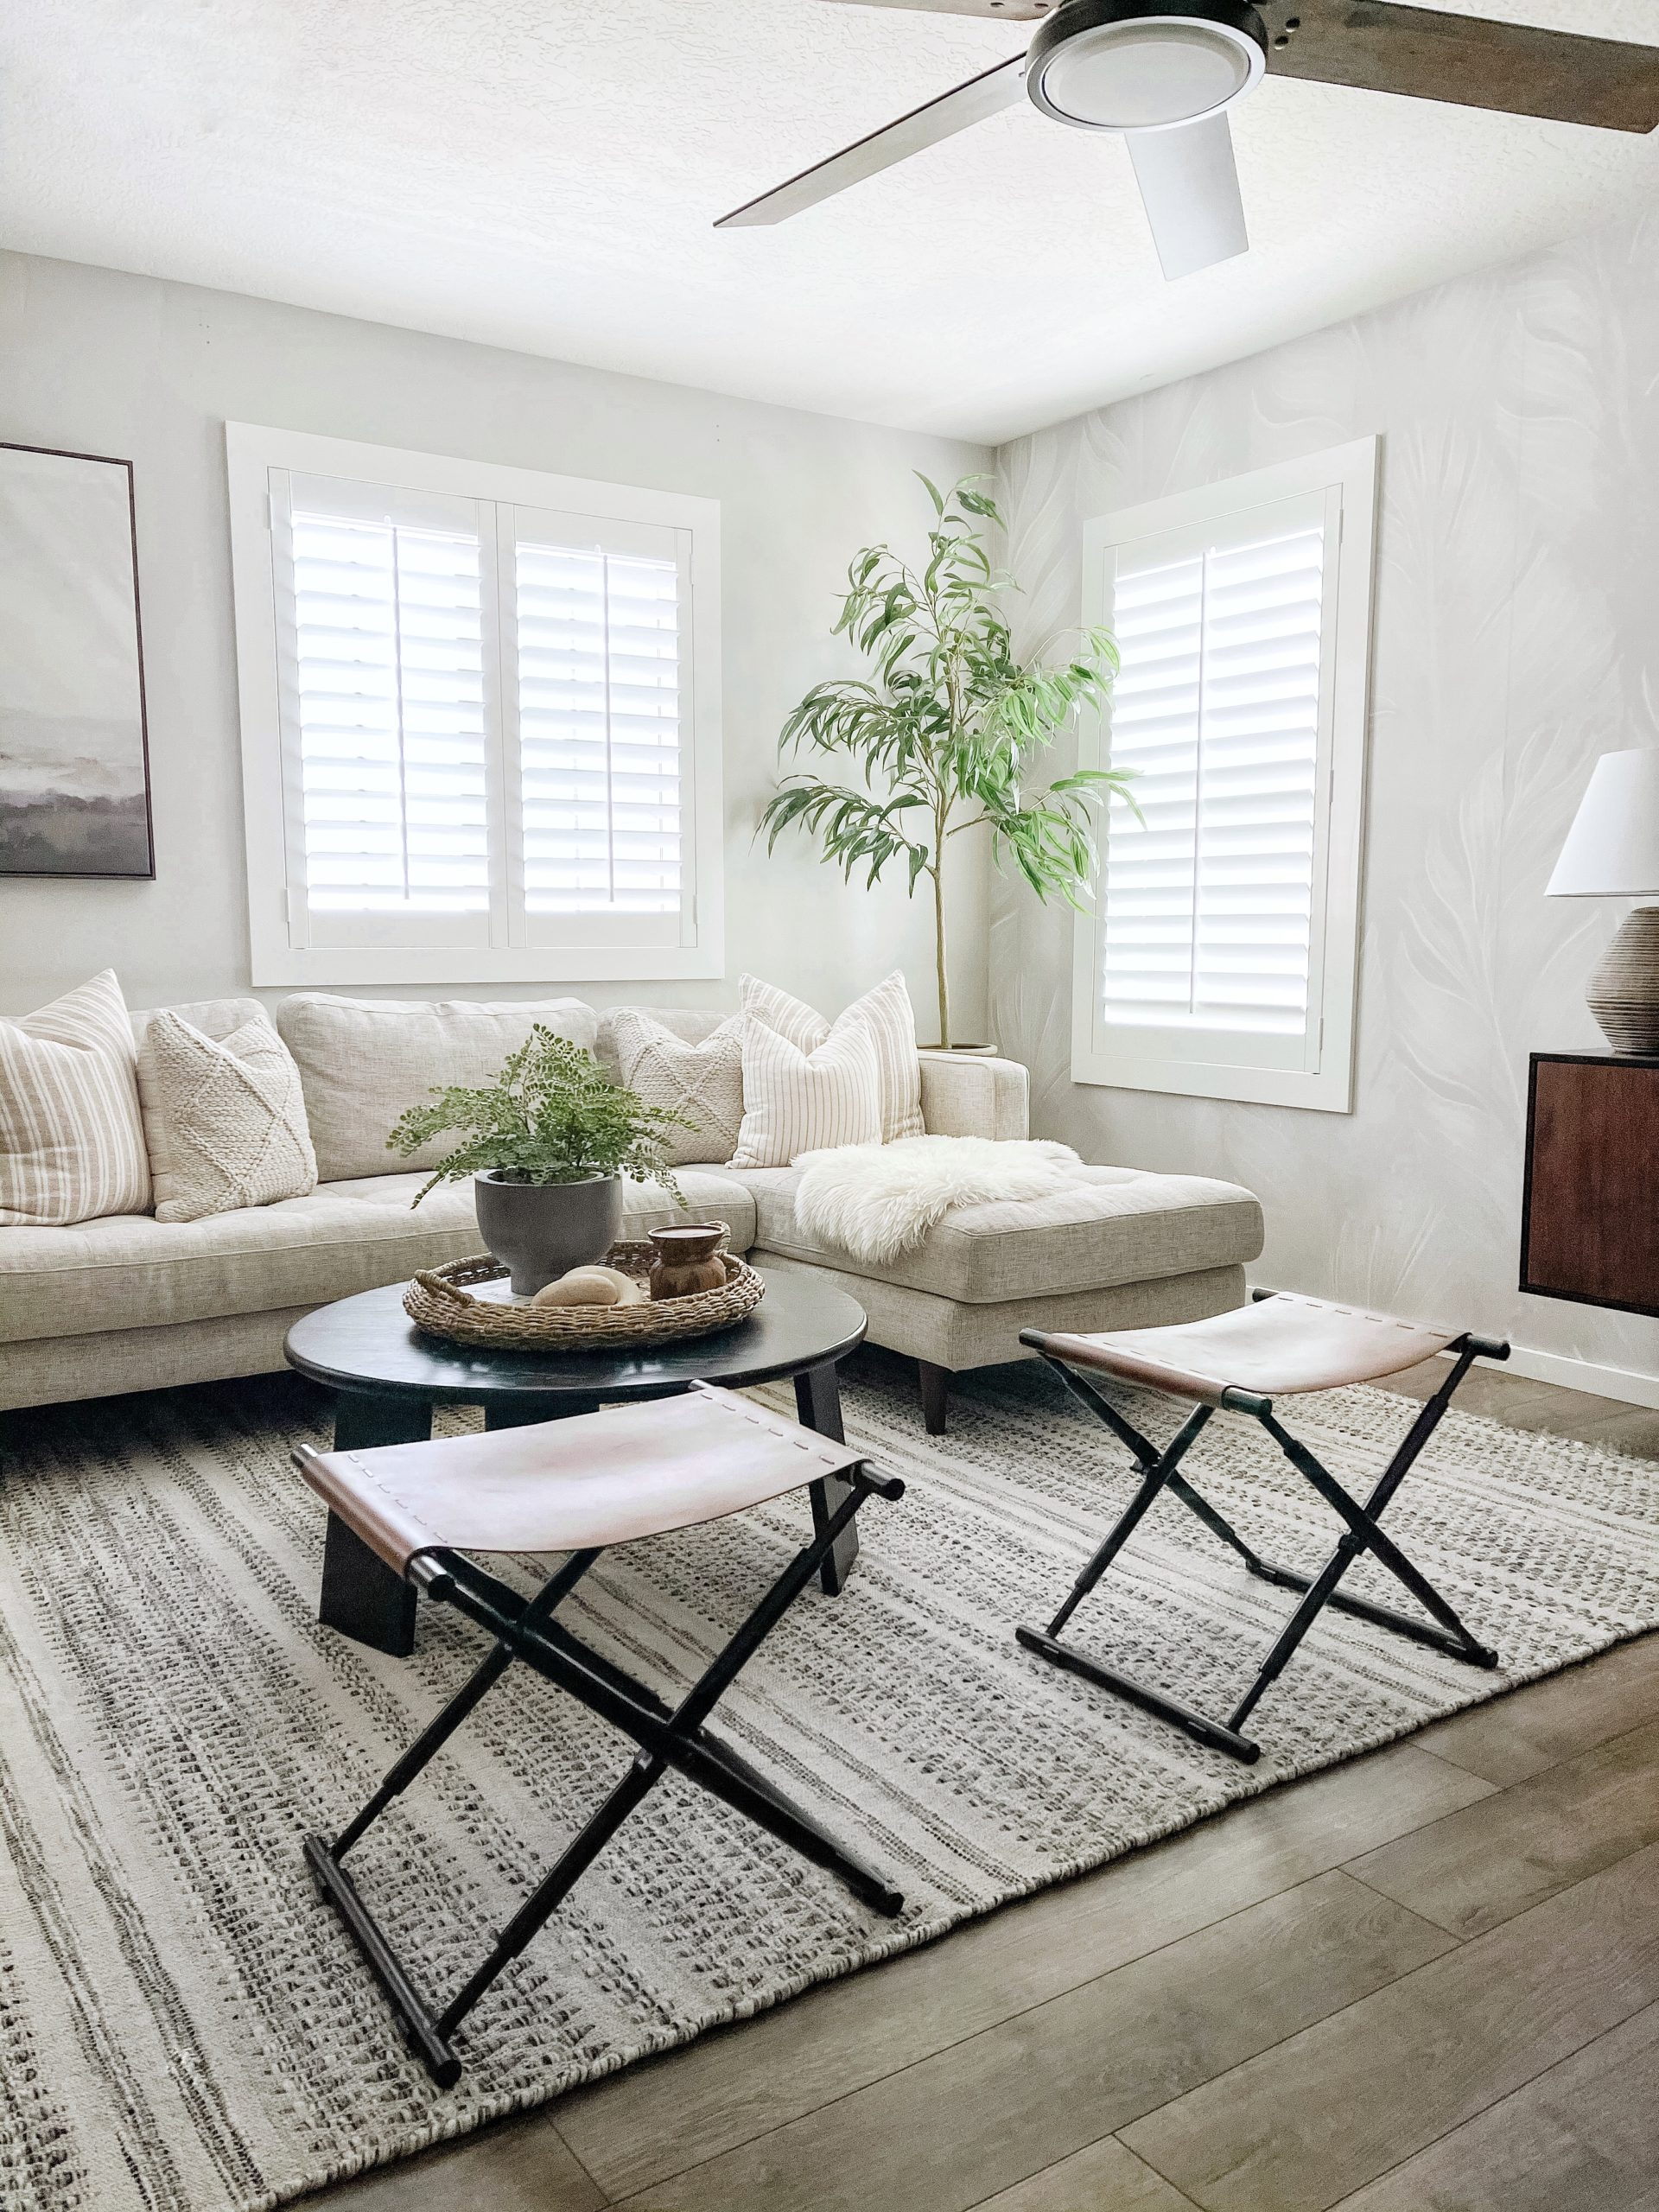 Window Treatments - Why we went with Shutters - Grey Birch Designs